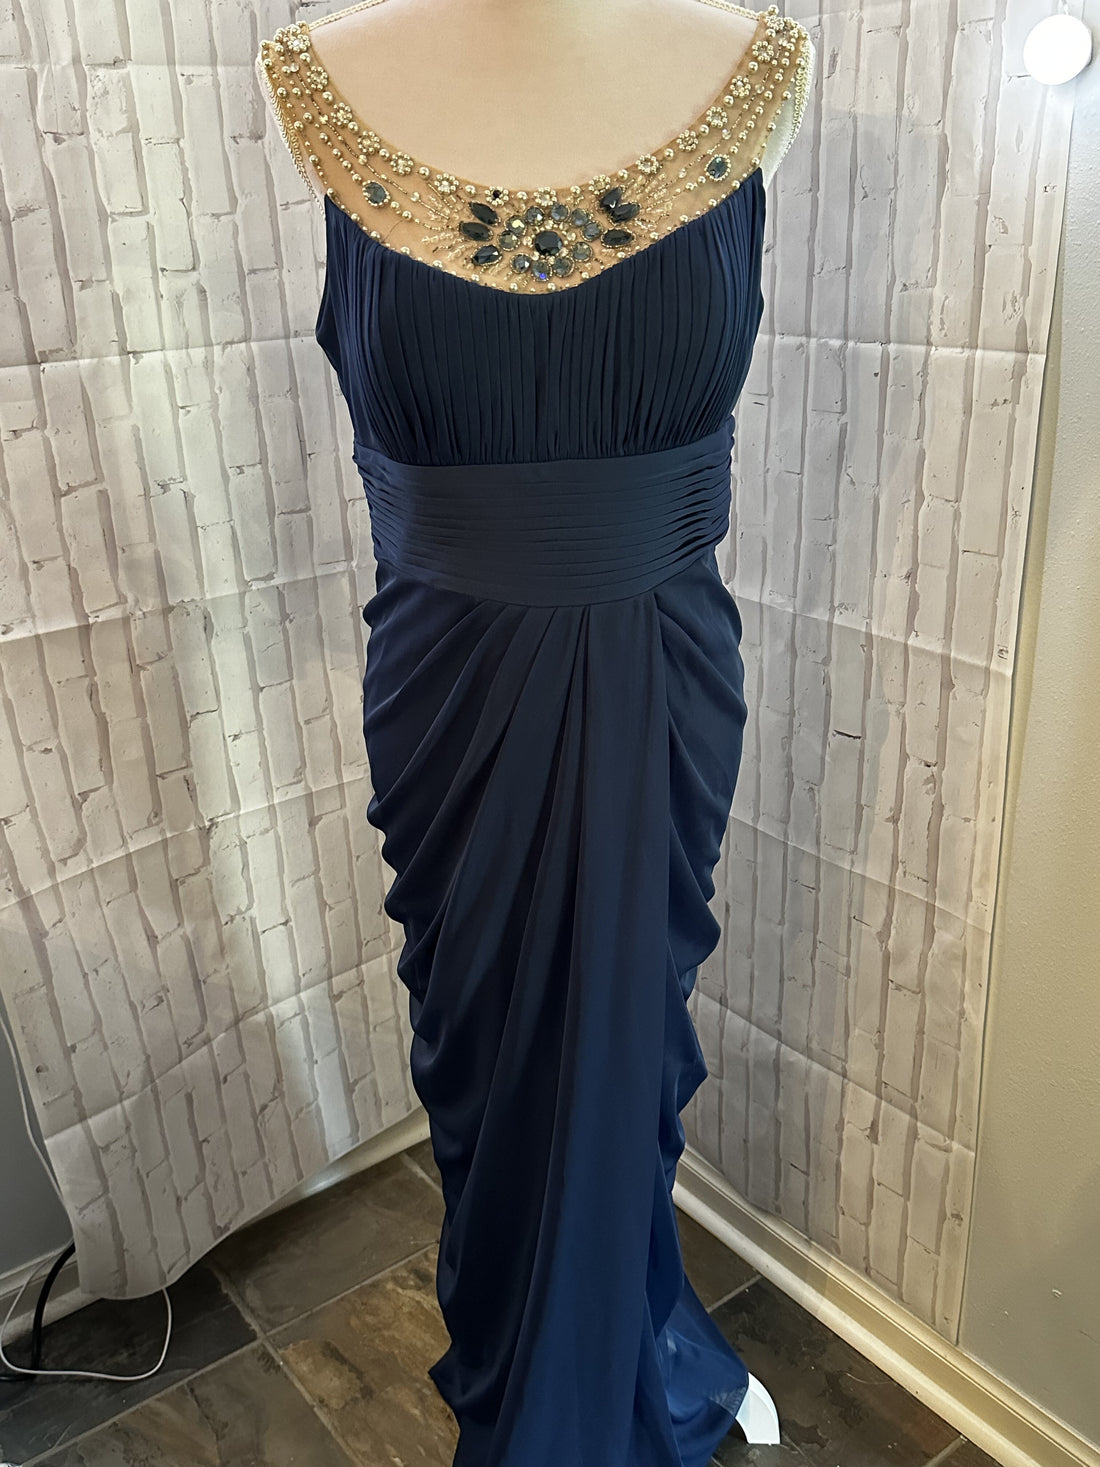 Adrianna Papell Gown - 8